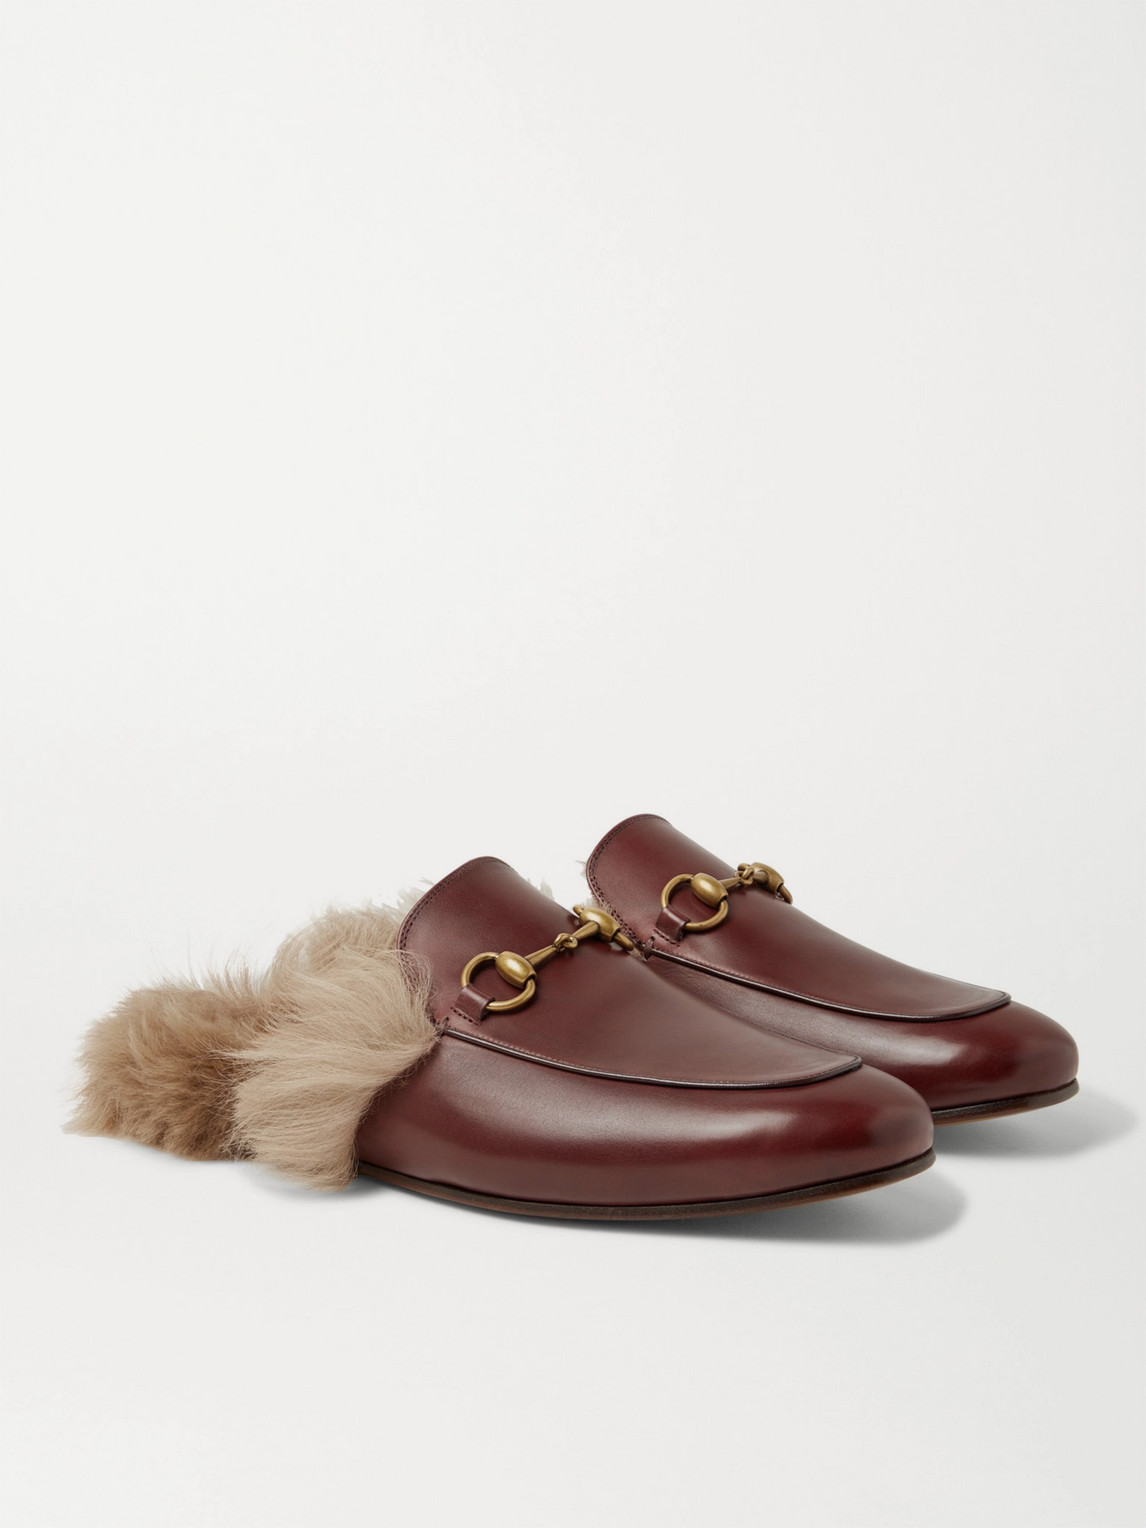 GUCCI PRINCETOWN HORSEBIT SHEARLING-LINED LEATHER BACKLESS LOAFERS